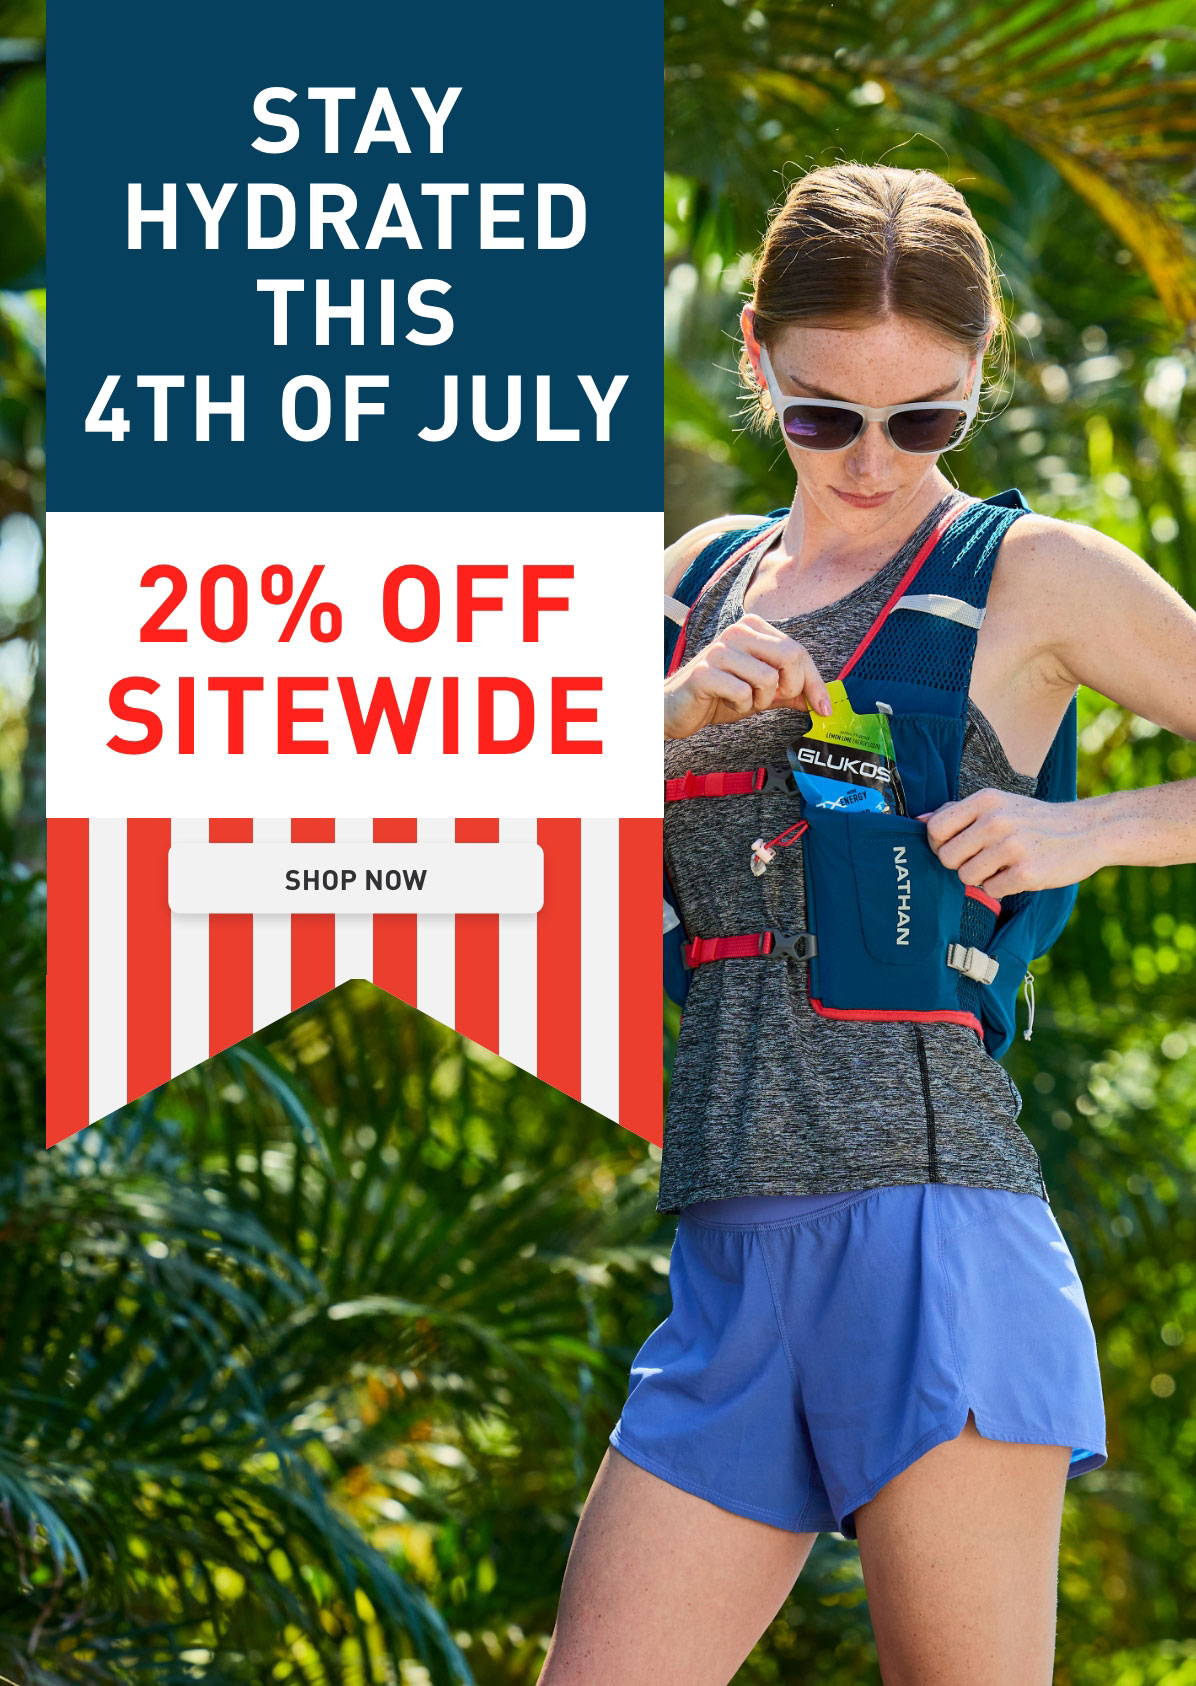 Stay Hydrated This 4th of July - 20% Off Sitewide - Shop Now